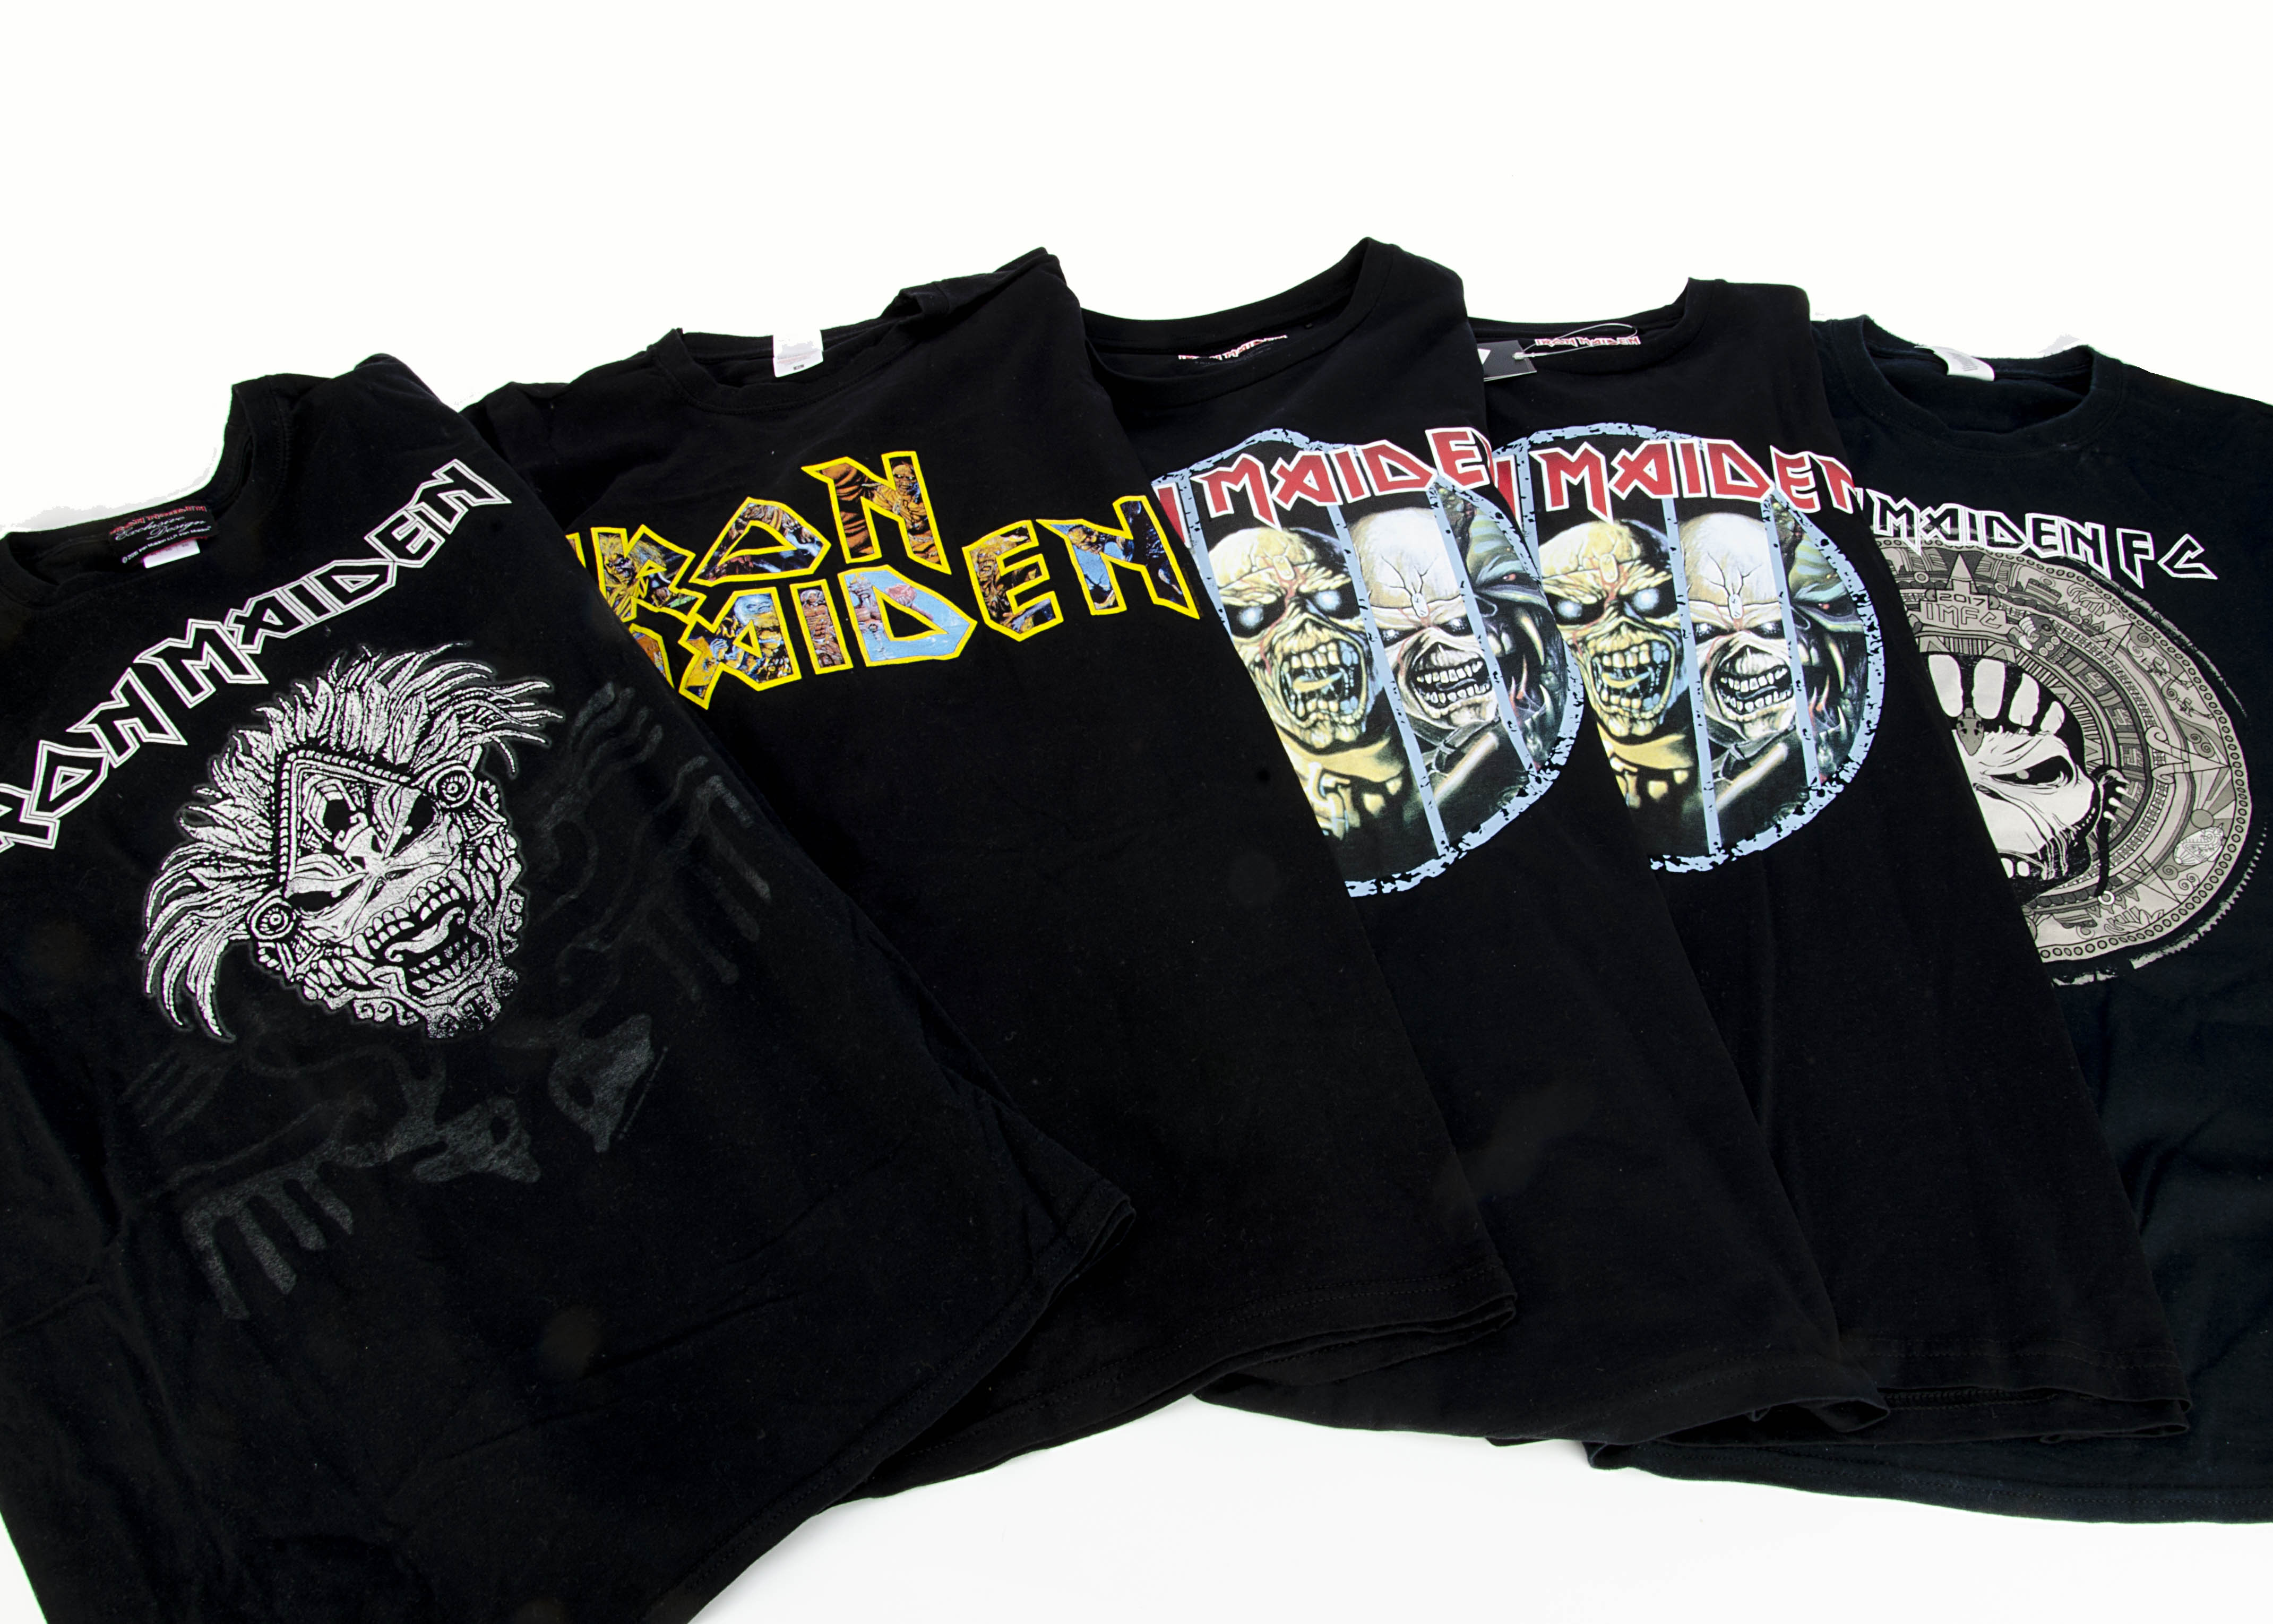 Iron Maiden 'T' Shirts, seventeen Iron Maiden 'T' shirts with a variety of prints on the front - Image 3 of 4